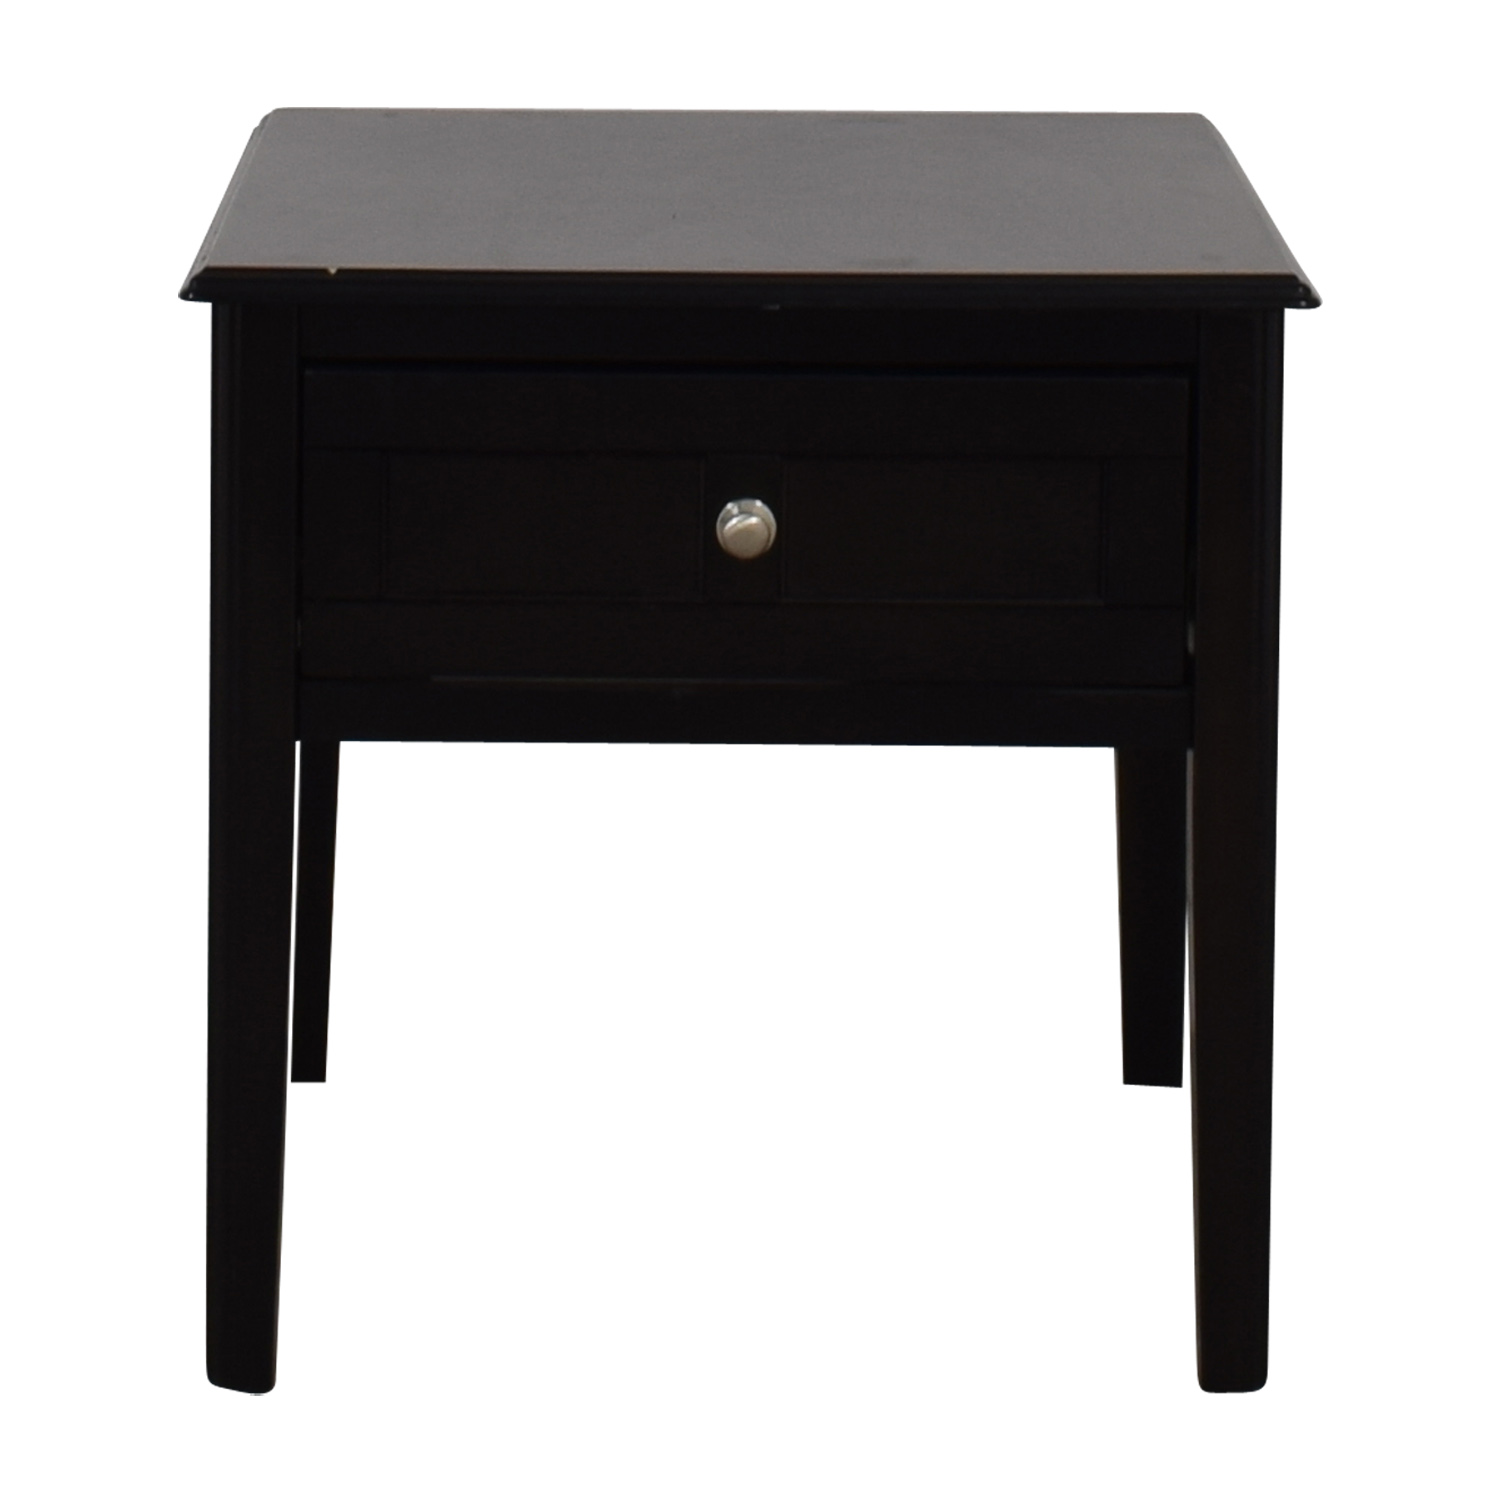 accent tables used for ashley furniture single drawer end table one second hand off white contemporary round drum stool black and lamp coffee sets with storage small red battery